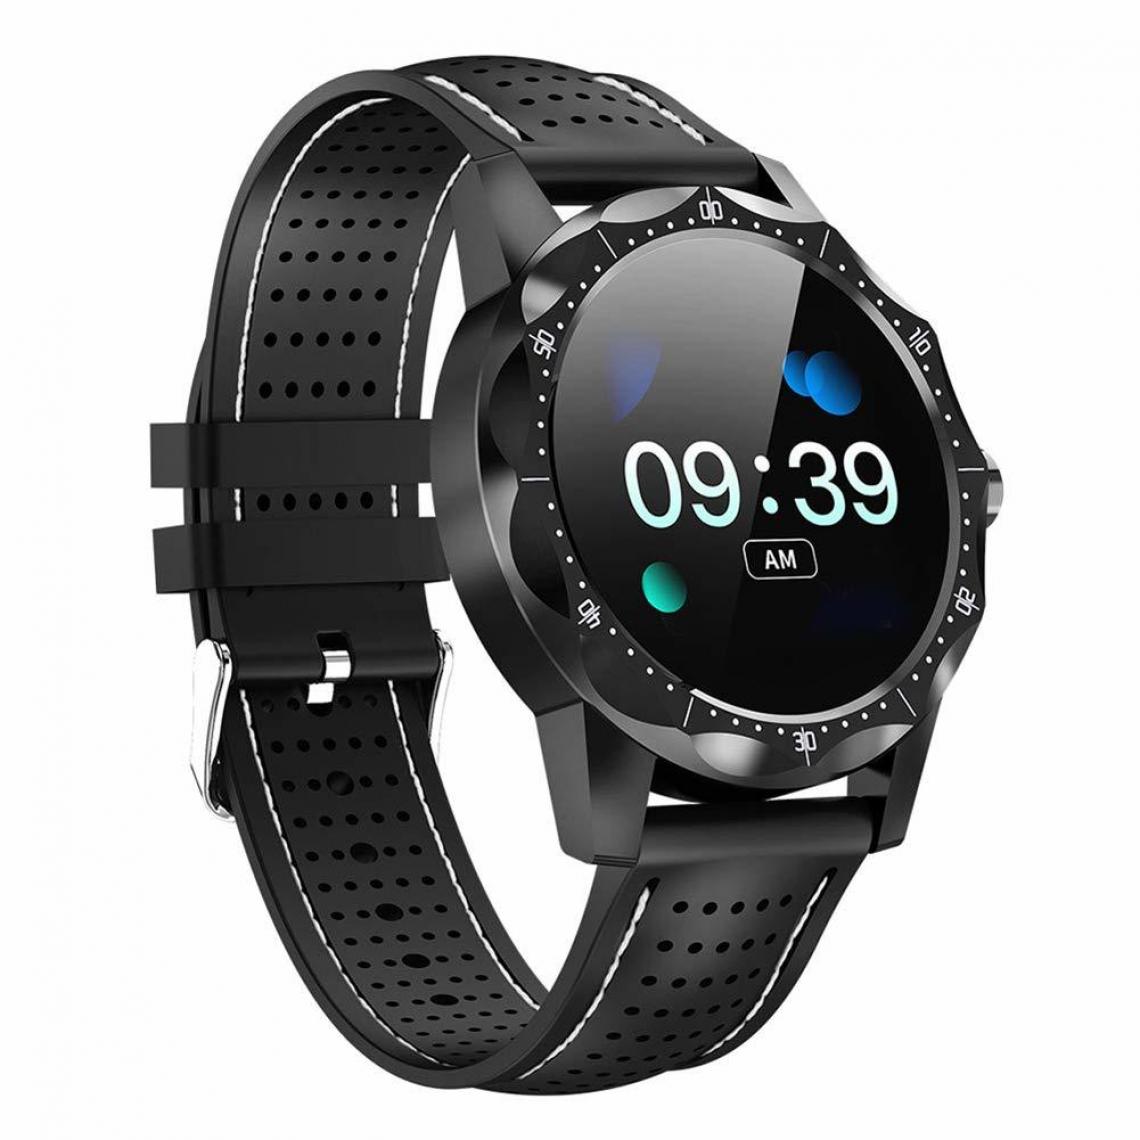 Chronotech Montres - Fitness Tracker Full Touch Screen, Smart Watch Waterproof IP68 for Men Women Heart Rate Monitor Fitness Tracker Watch Sport Smartwatch for Android IOS(black) - Montre connectée